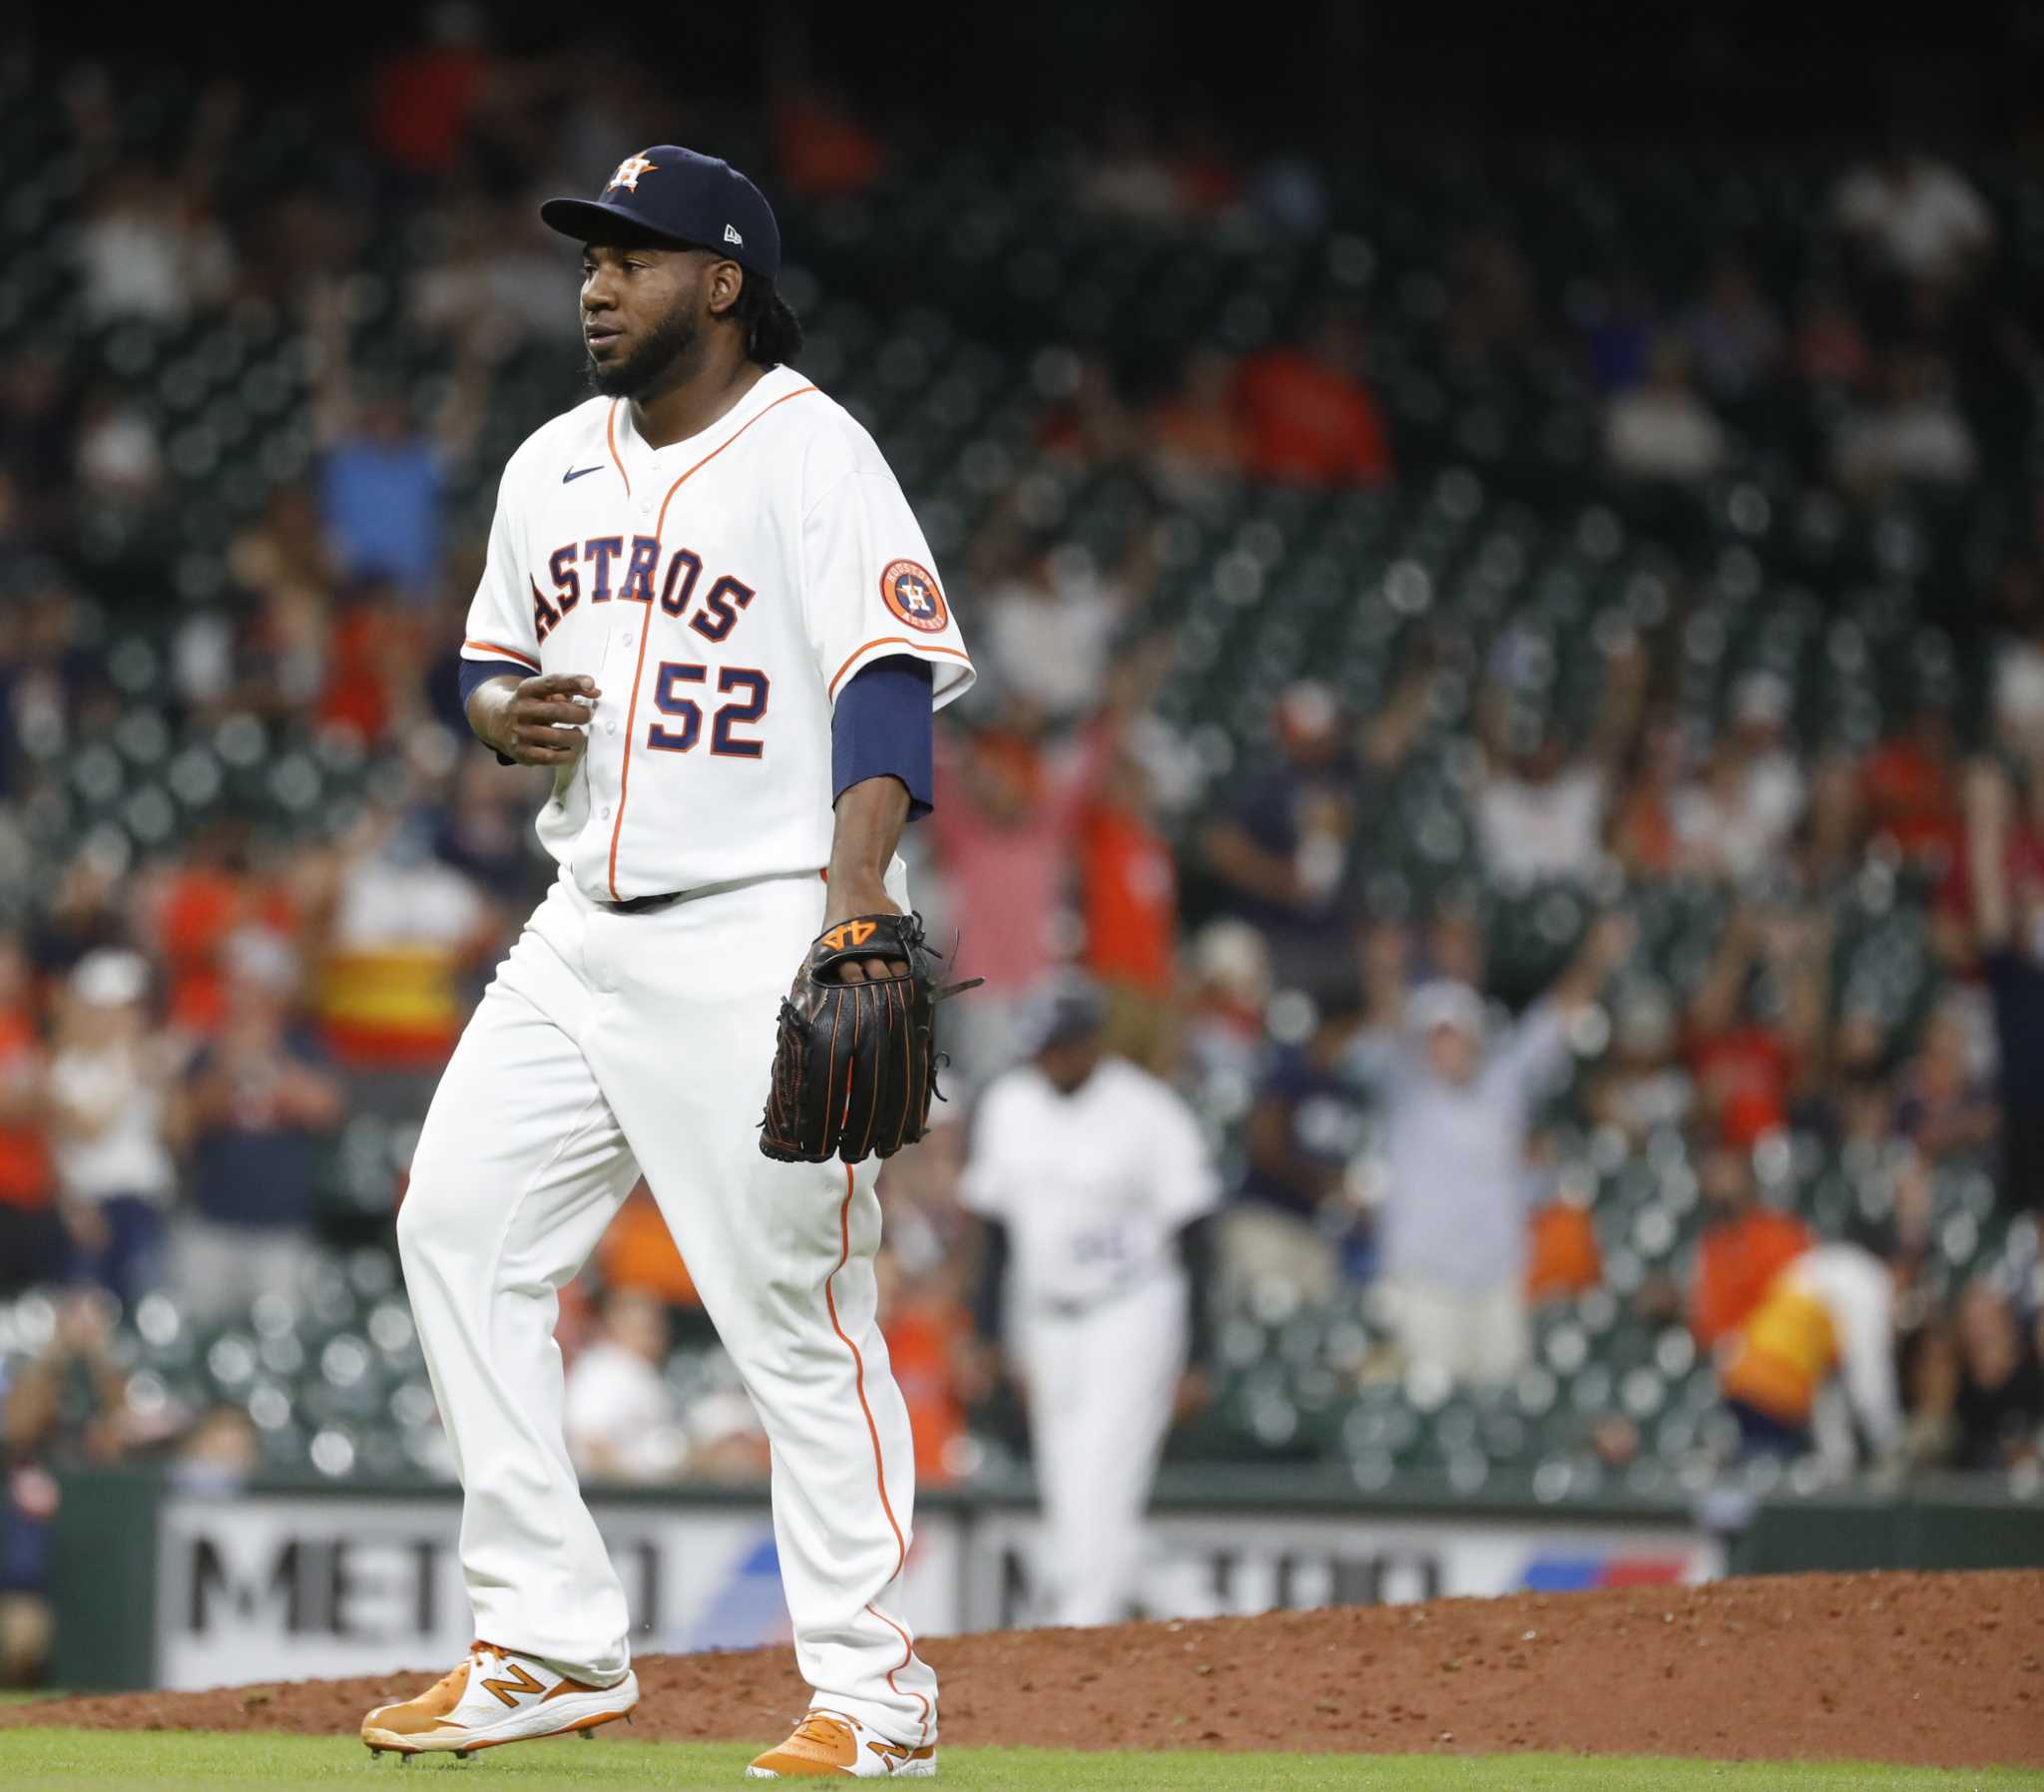 Pedro Báez signs two-year contract with Astros